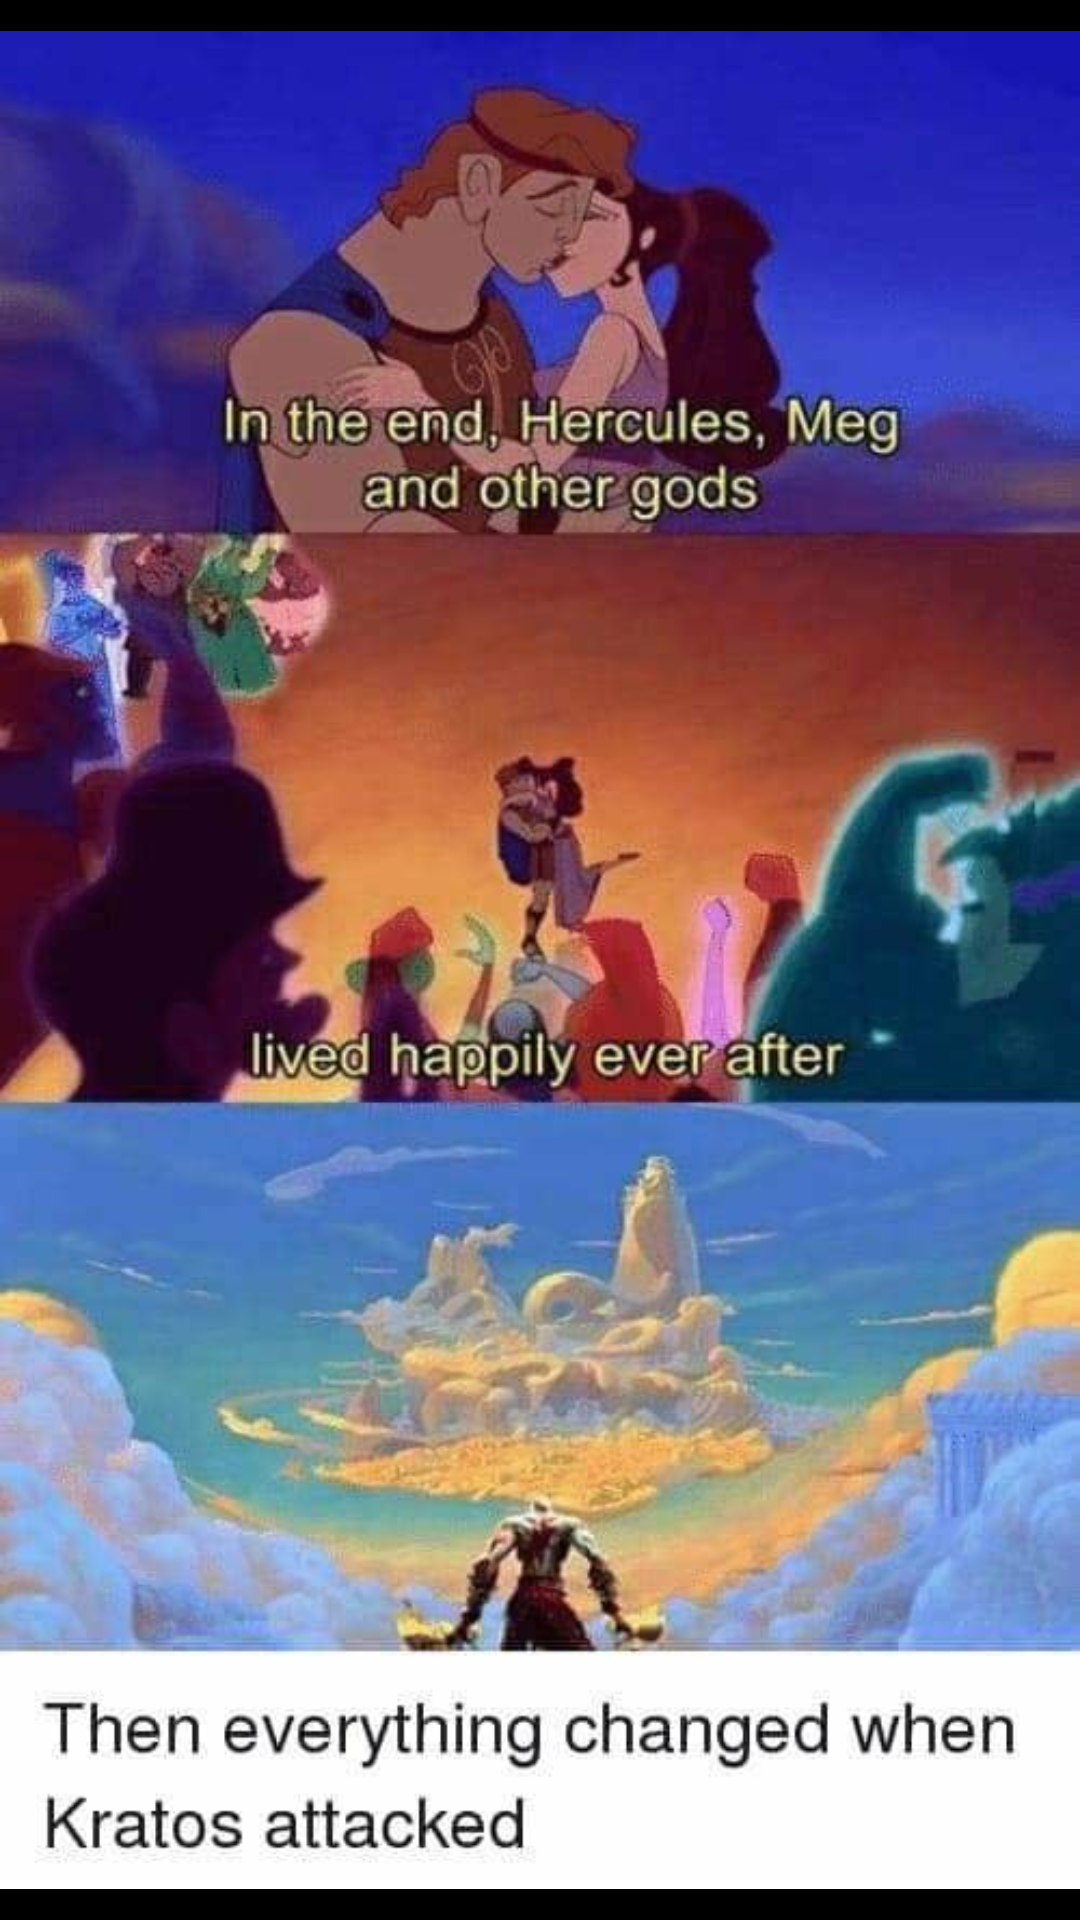 god of war hercules meme - In the end Hercules, Meg and other gods lived happily ever after Then everything changed when Kratos attacked